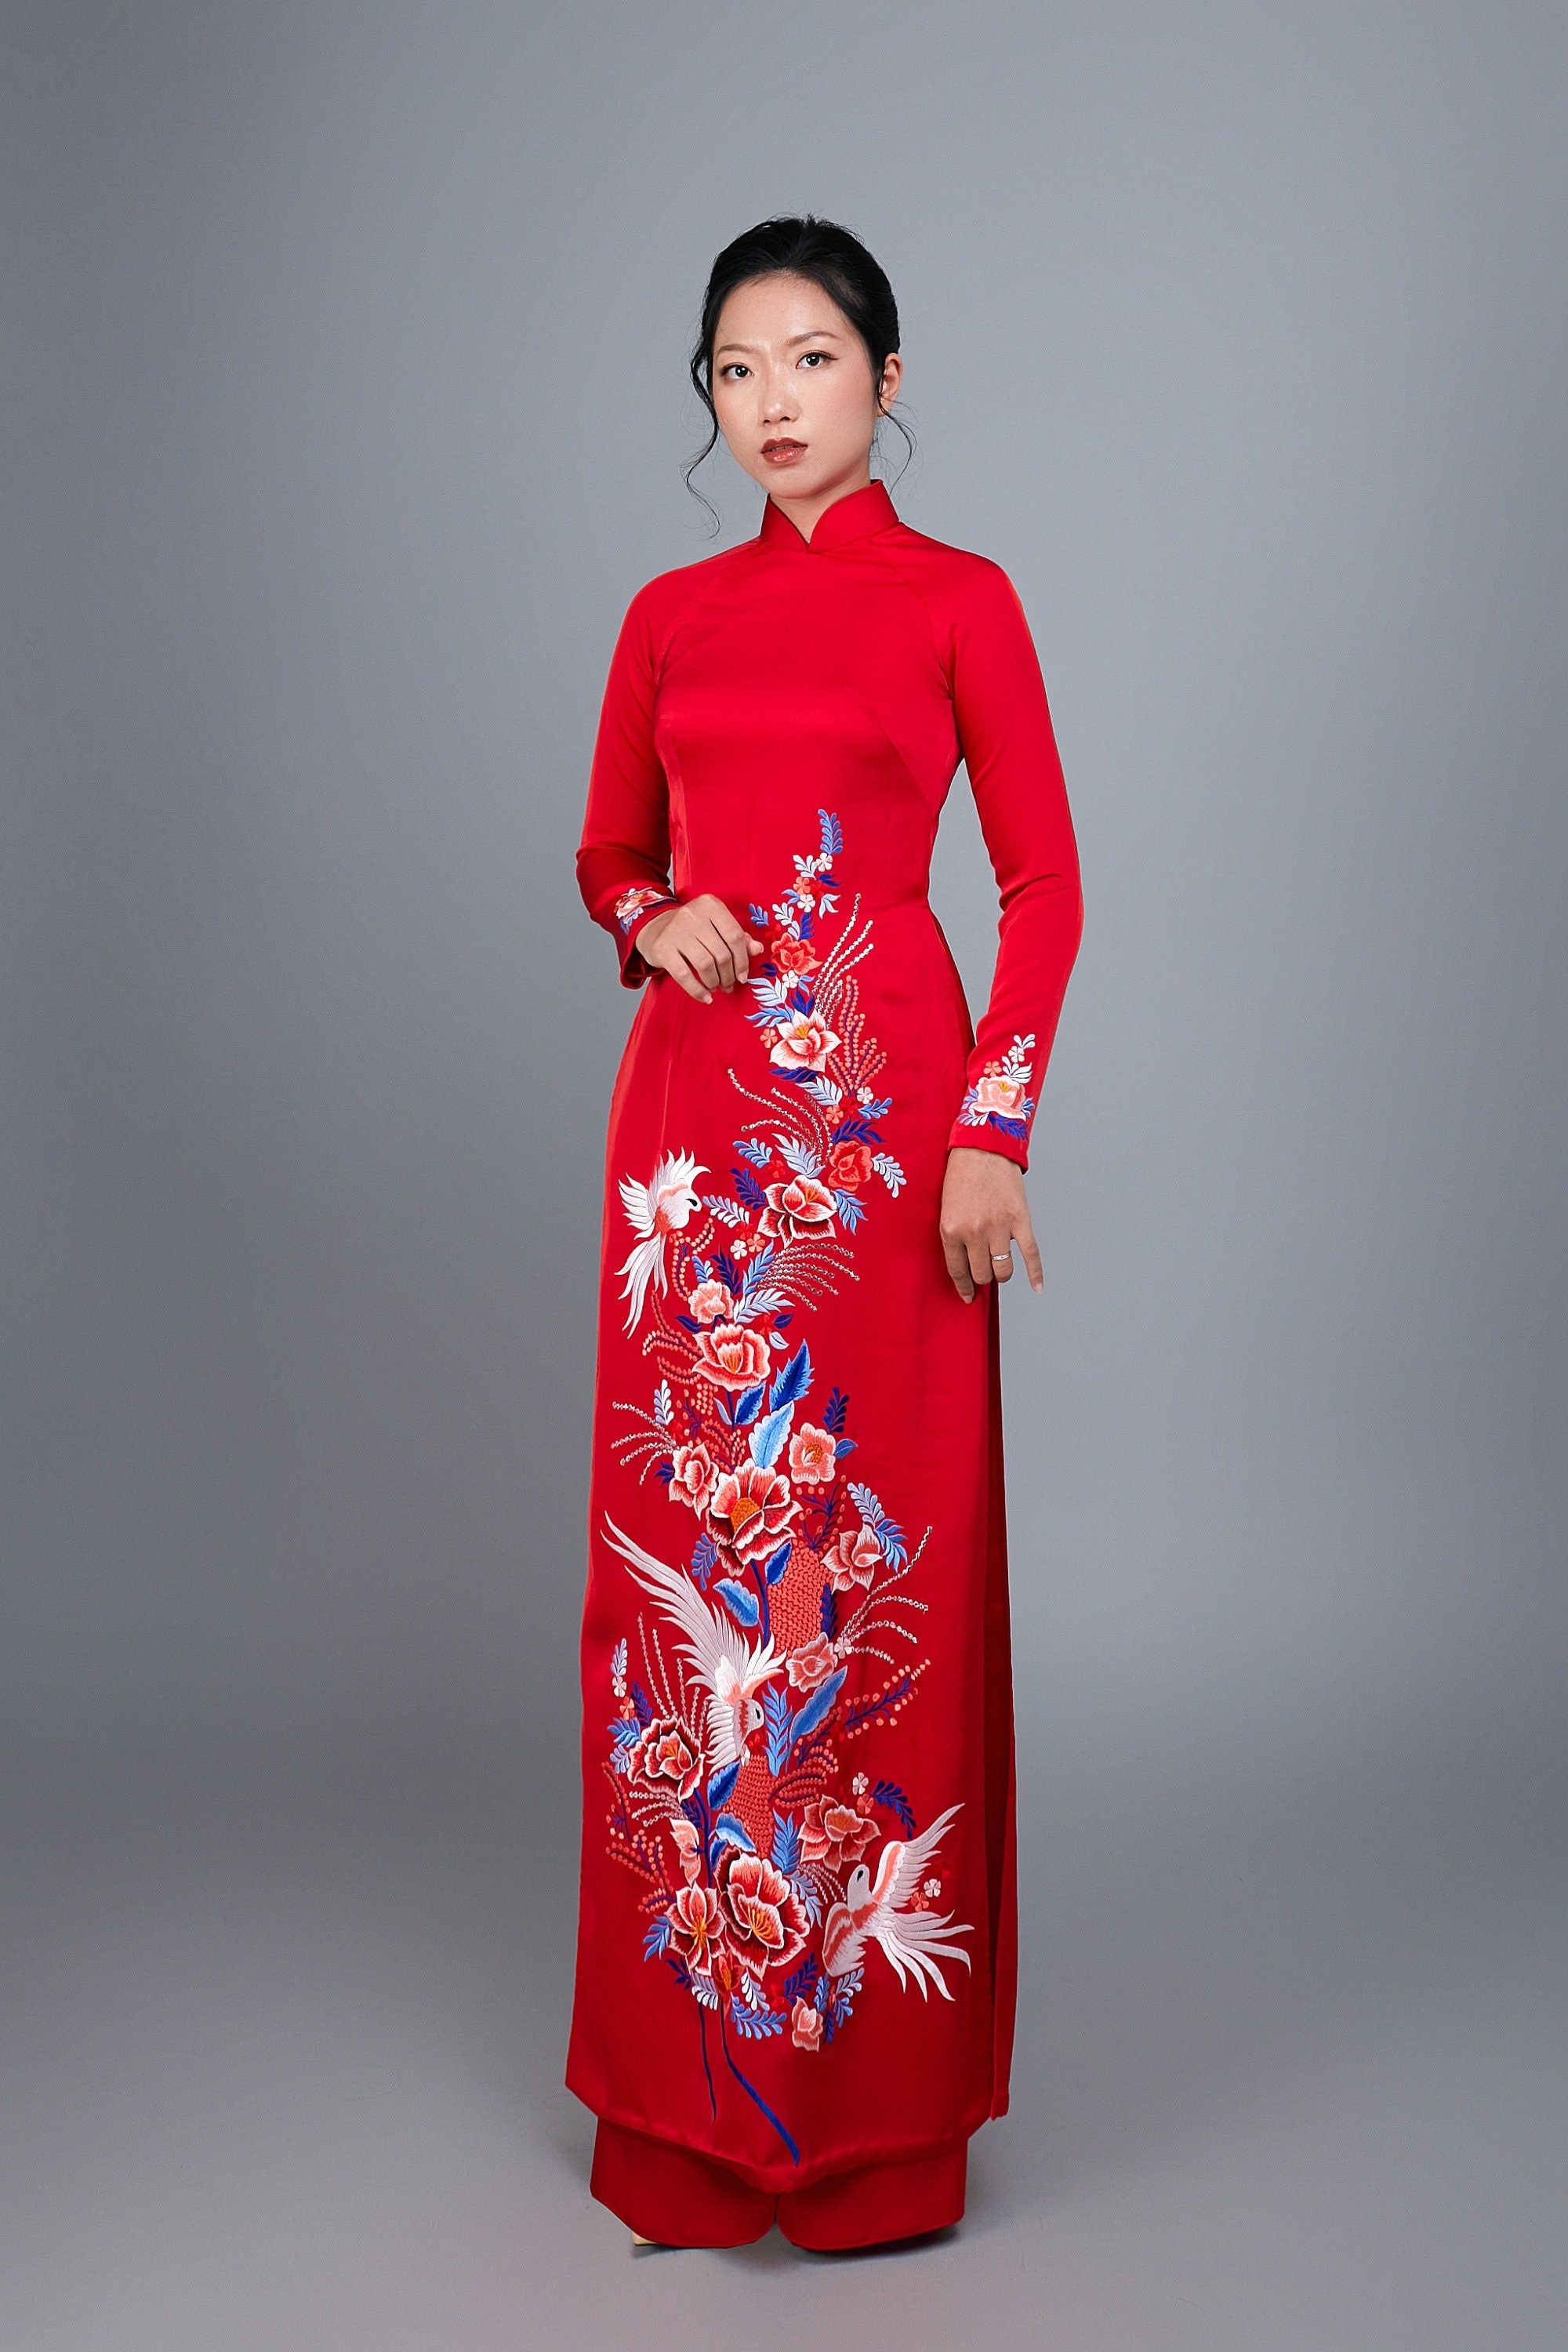 Women's ao dai dress Vietnamese traditional long dress. High quality red silk fabric with embroidered flower motif